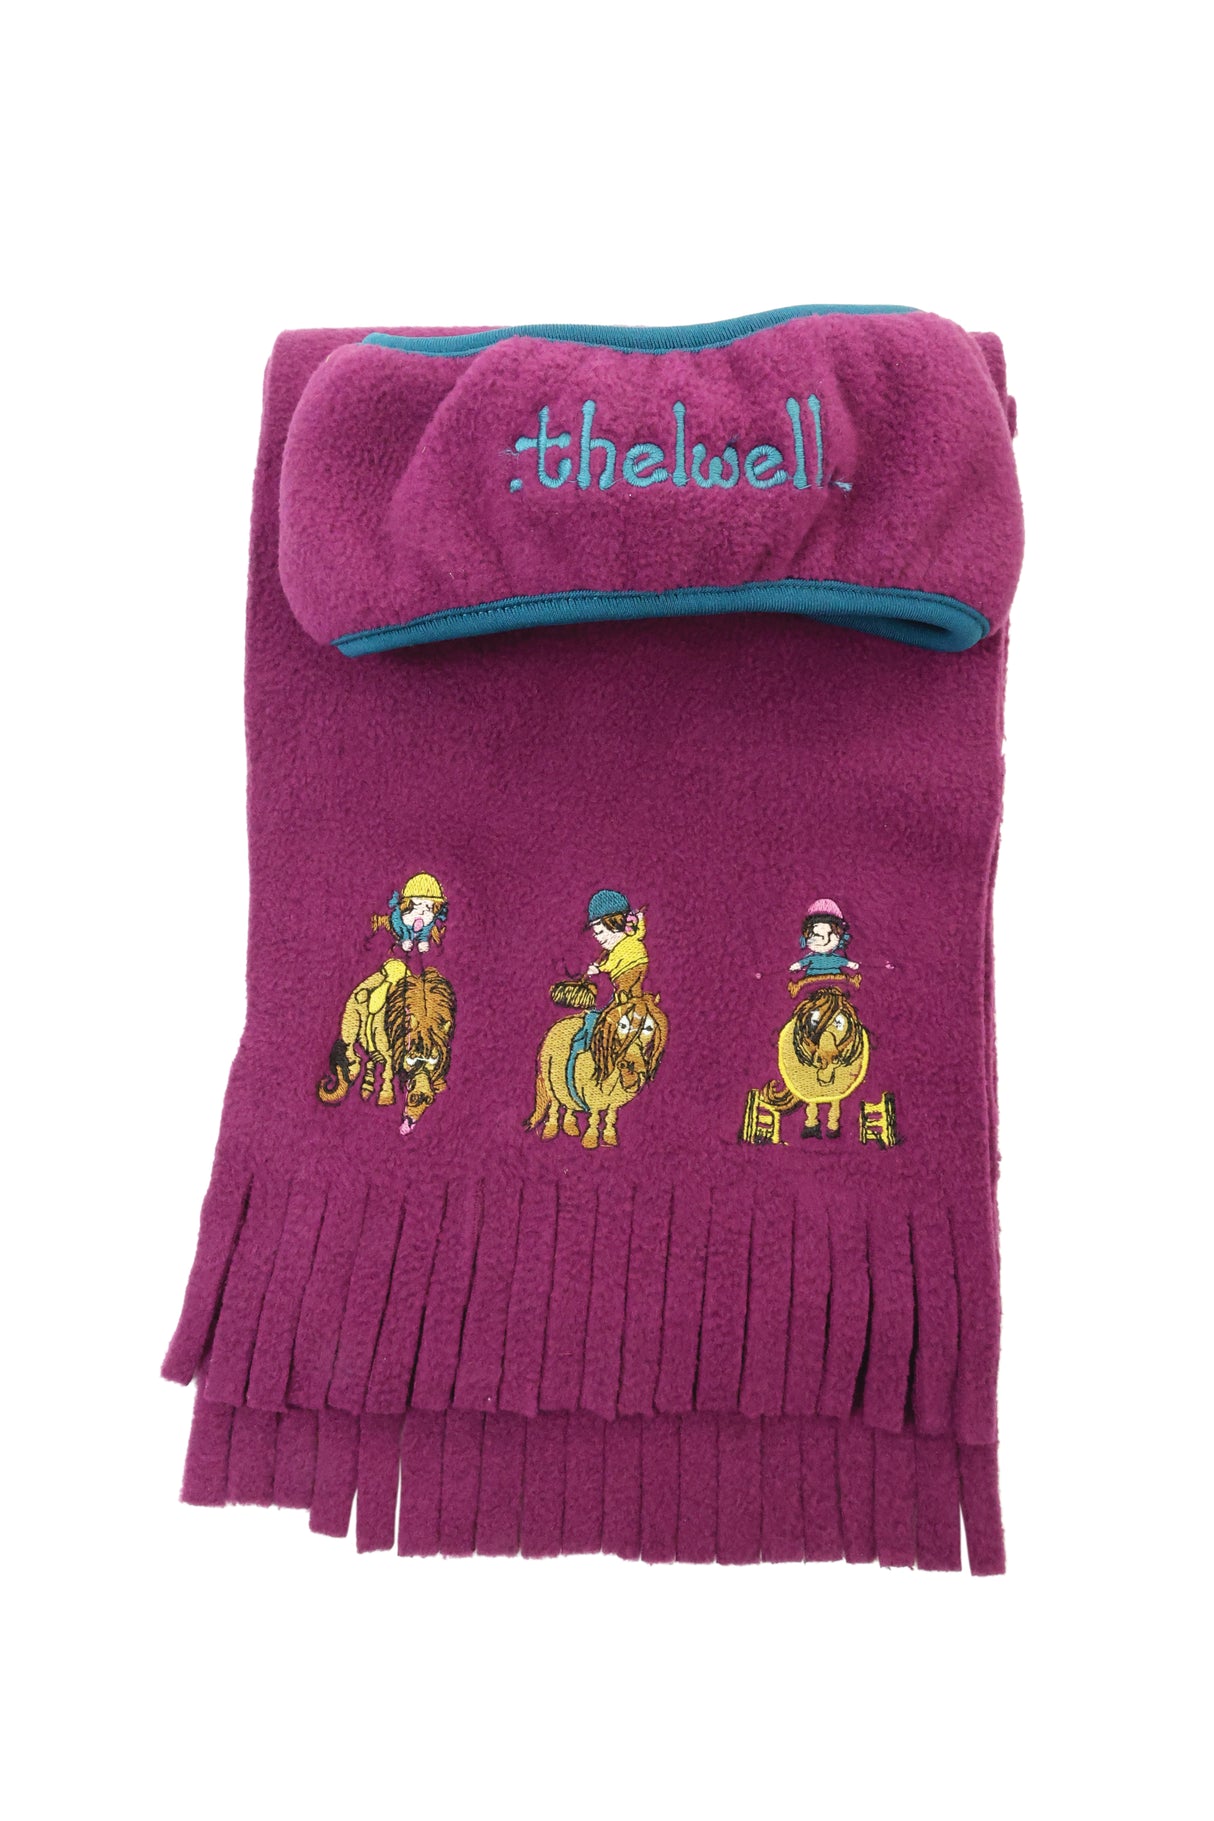 Hy Equestrian Thelwell Collection Pony Friends Fleece Headband & Scarf Set